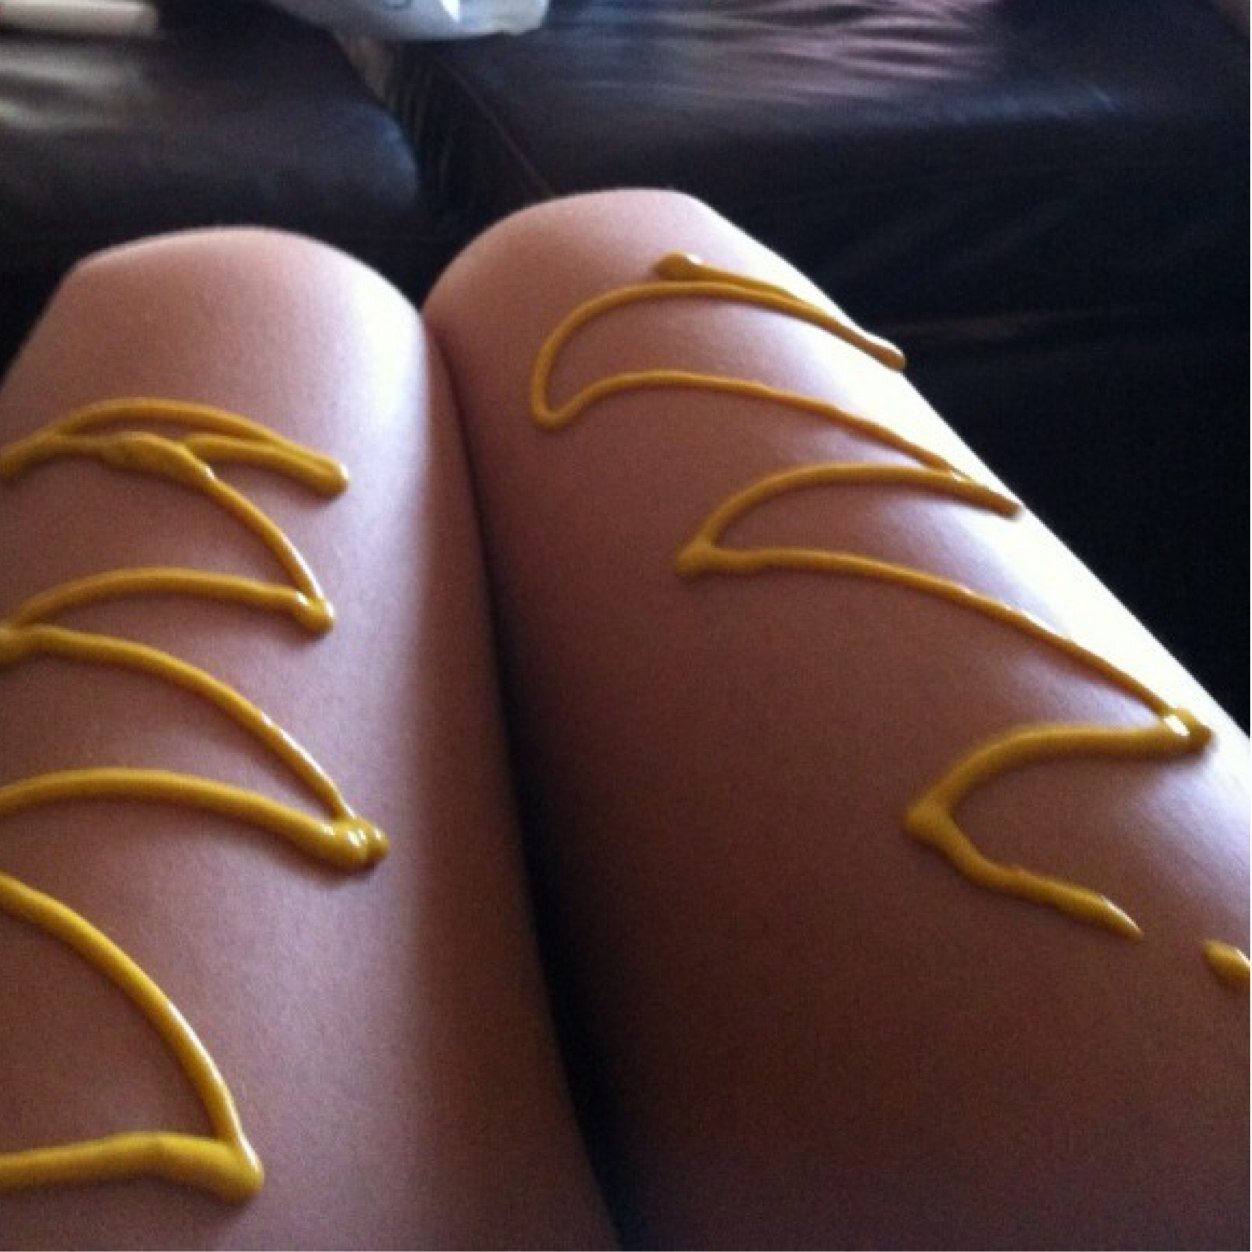 hot dogs or legs 14